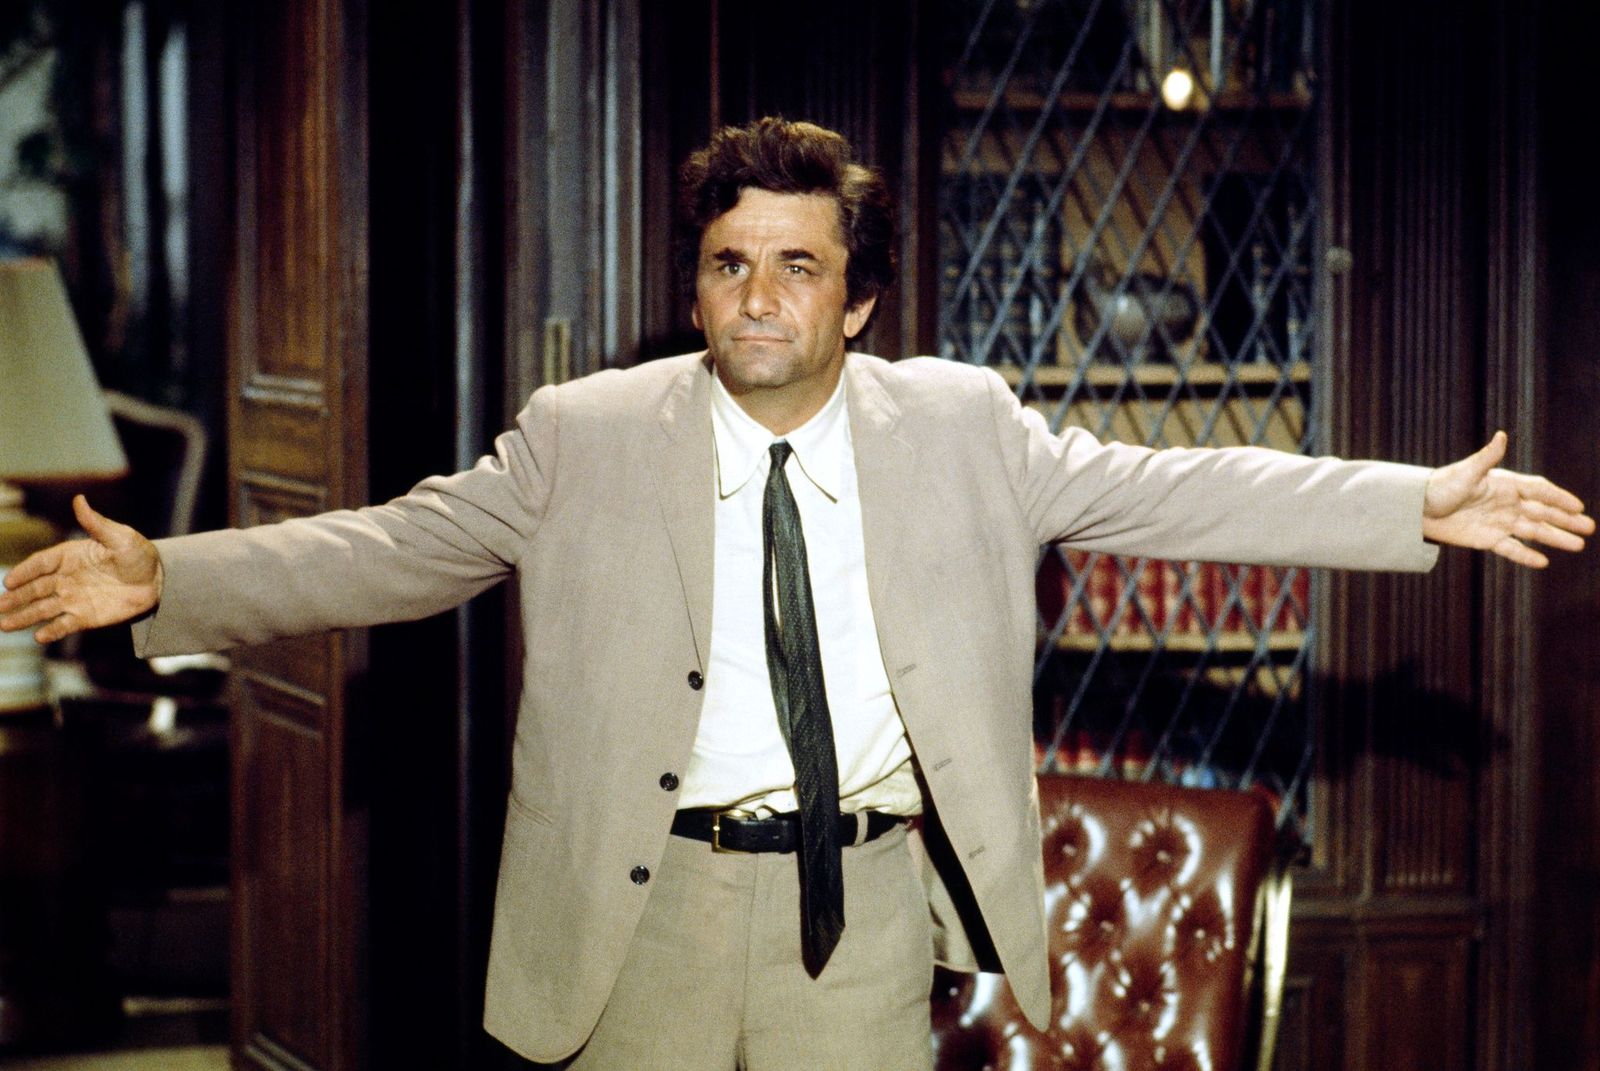 Peter Falk during his scene in the TV series "Columbo." | Photo: Getty Images